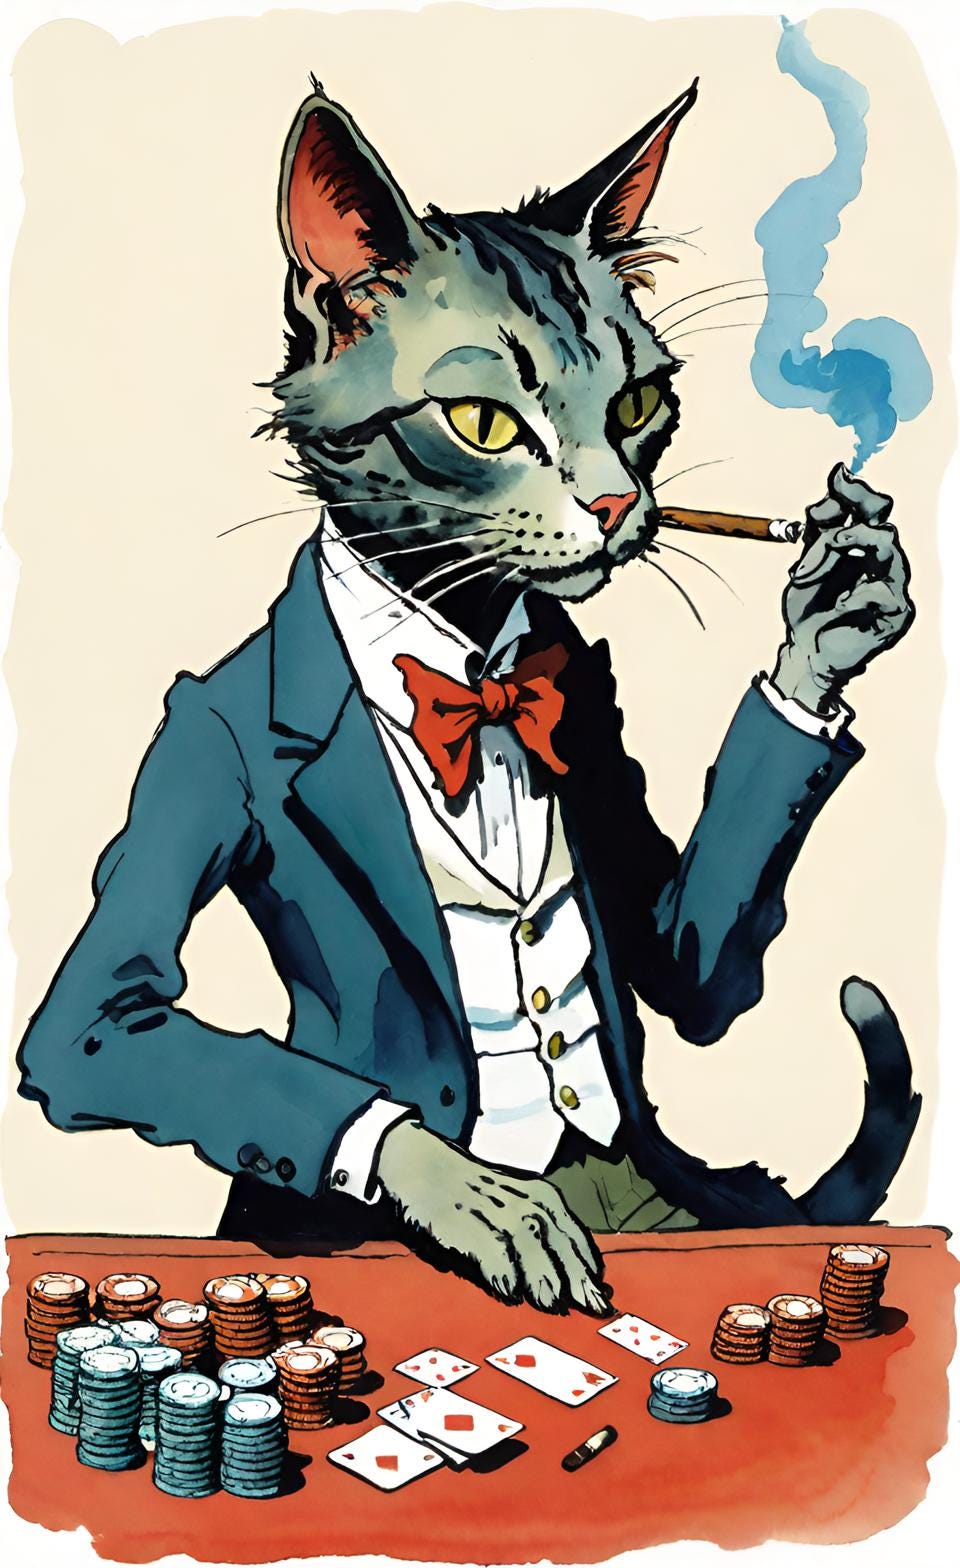 A cat wearing a suit and smoking a cigarette.